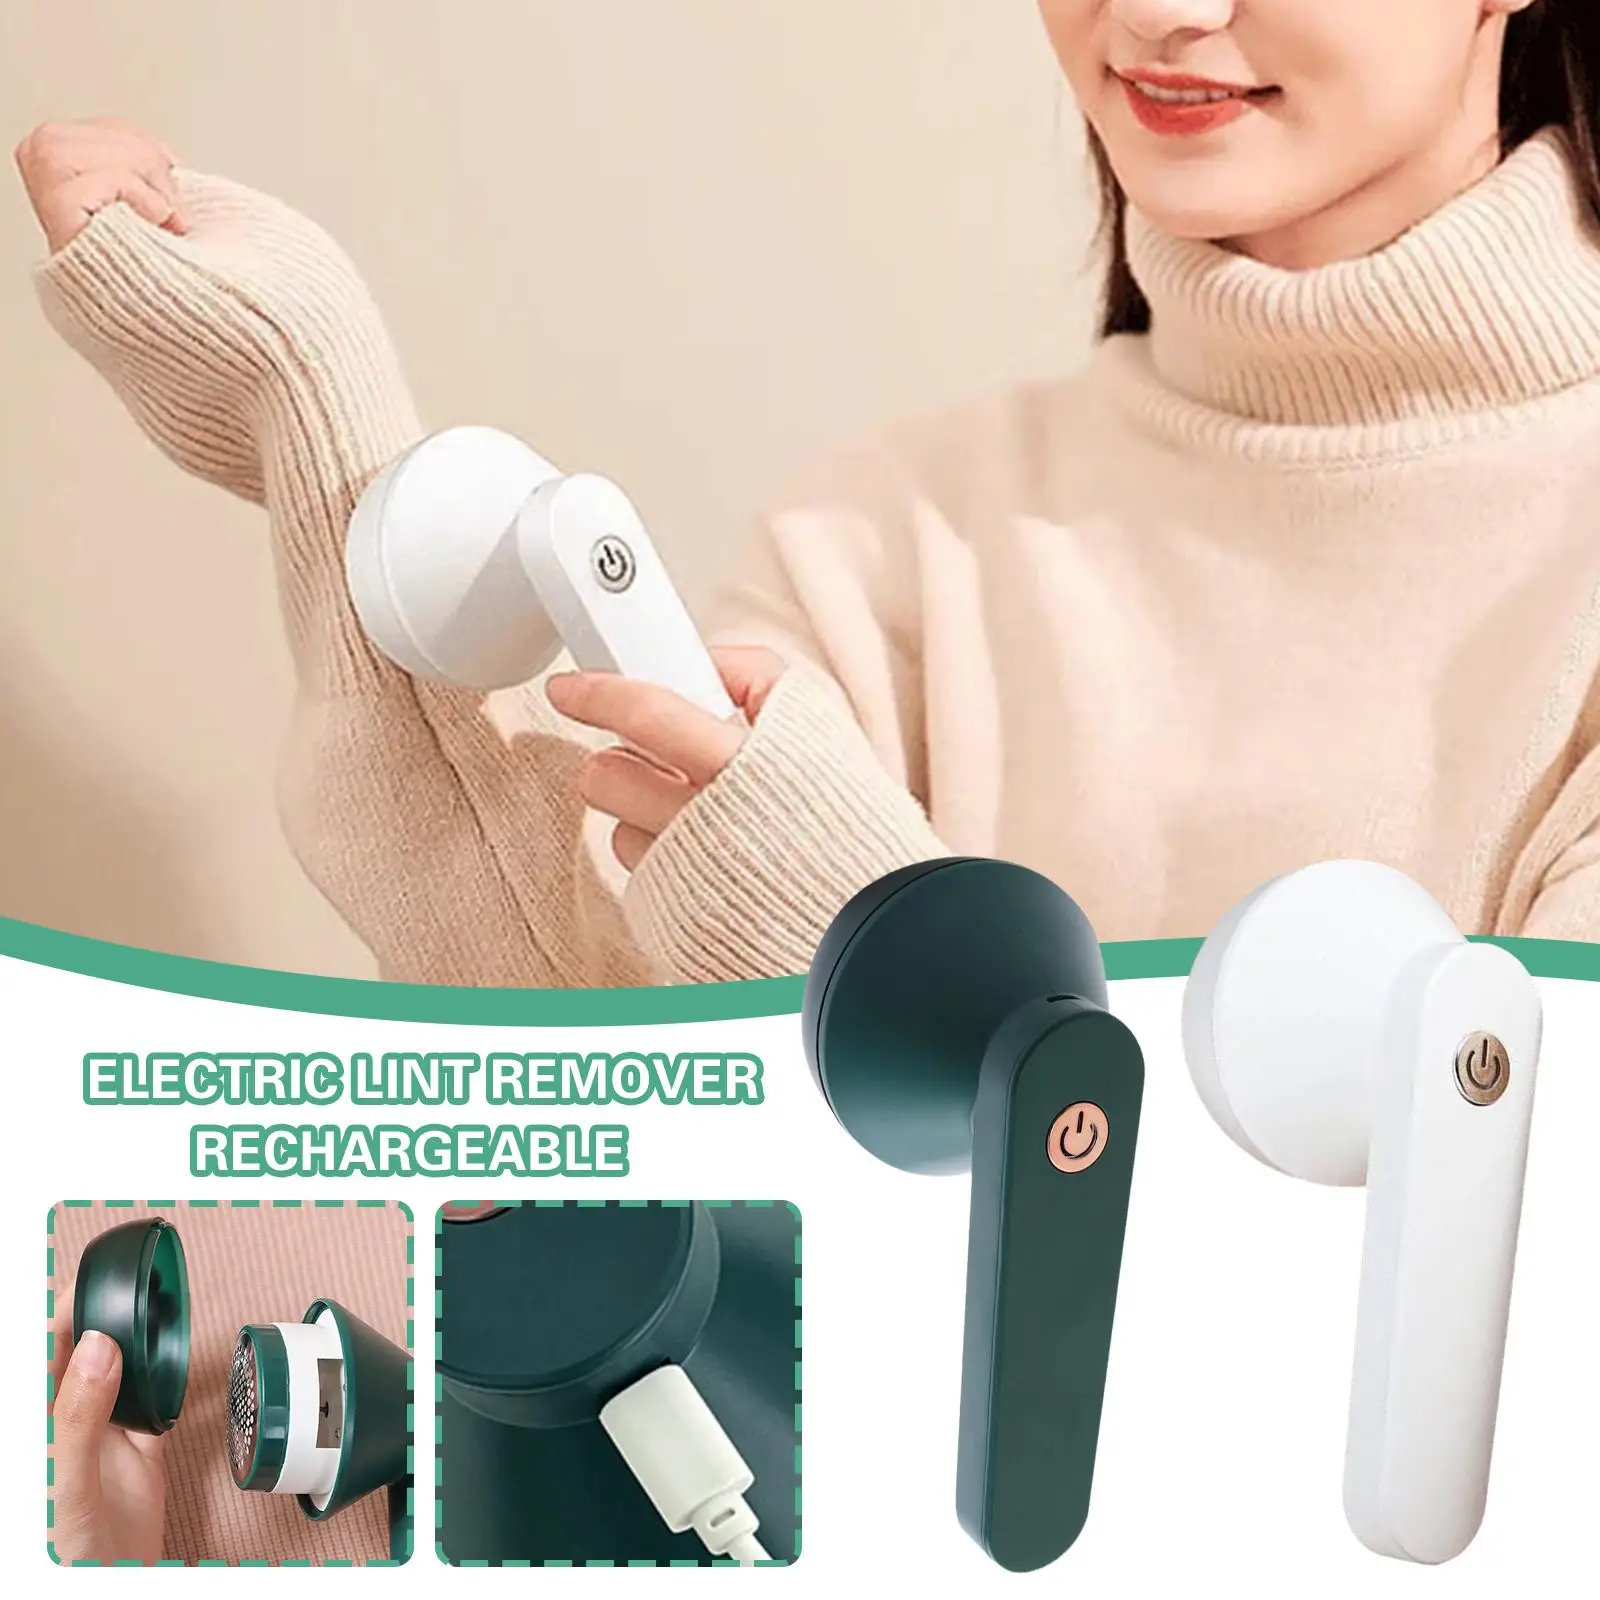 

Electric Pellets Lint Remover for Clothing Hair Ball Trimmer Fuzz Clothes Sweater Fabric Shaver Cut Machine Spools Removal